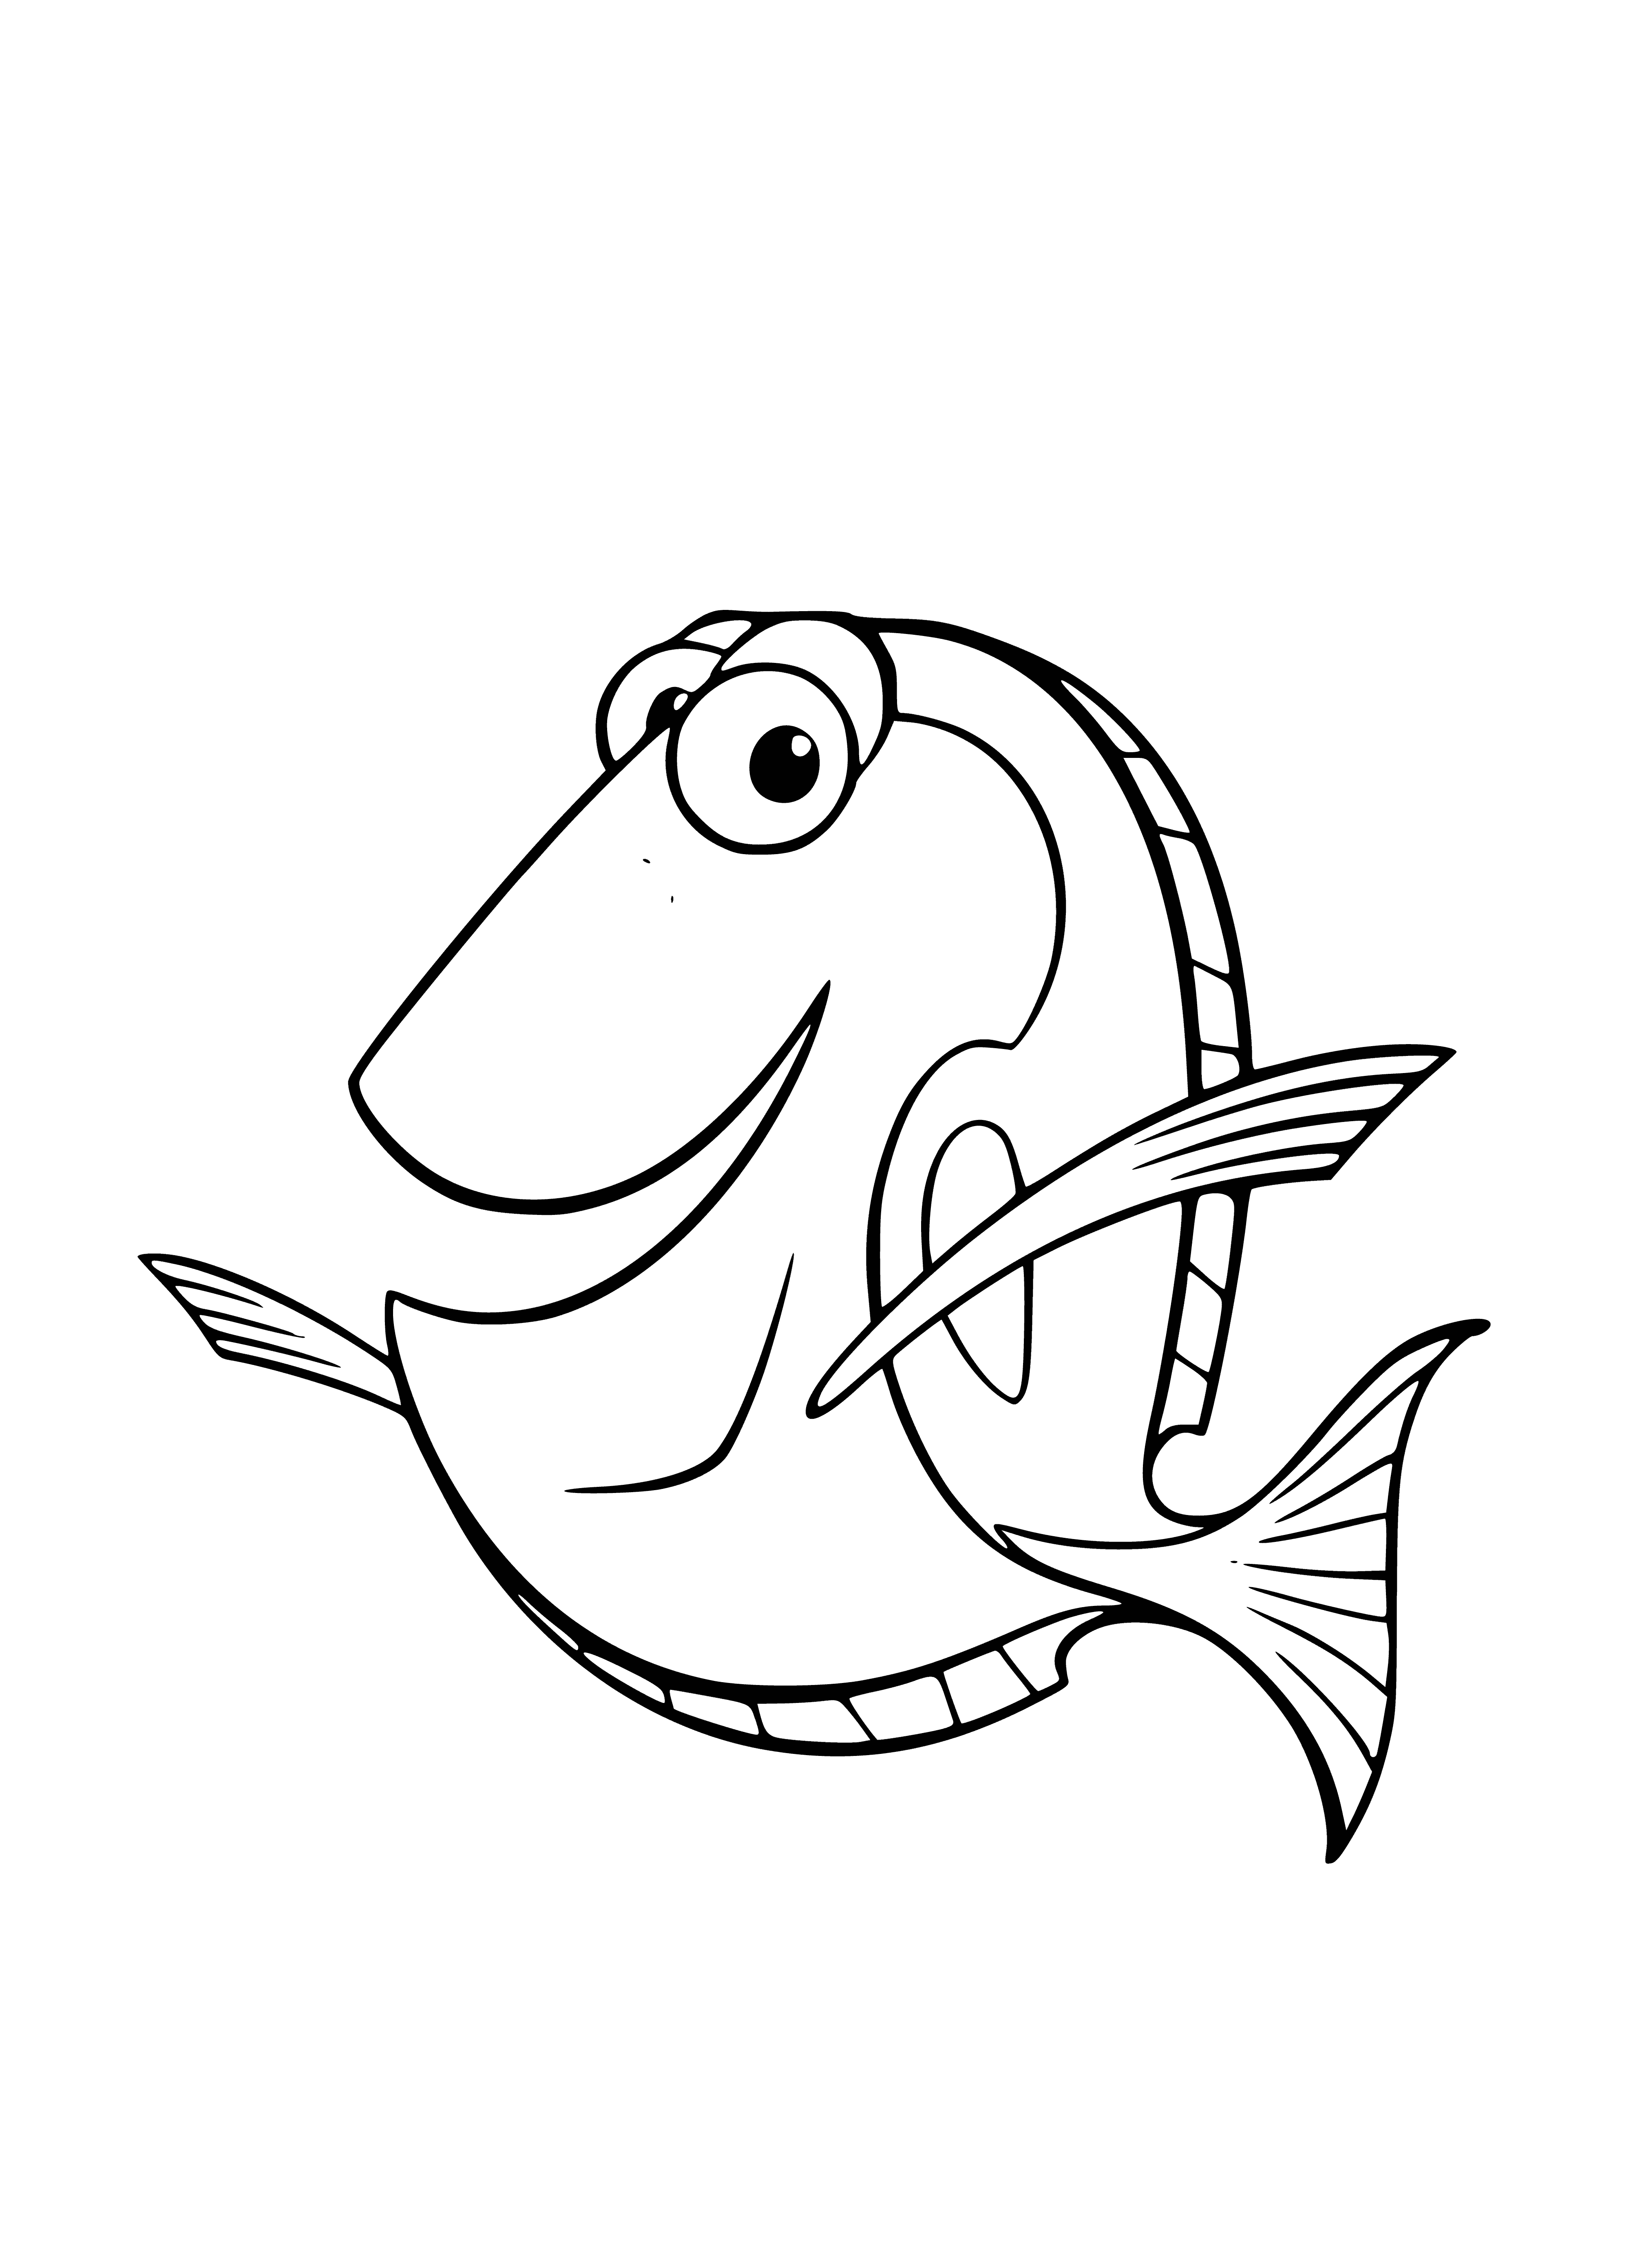 coloring page: Dory is a zesty blue fish with bright yellow fins, cheerful eyes & smile; always up for an adventure & making new friends!